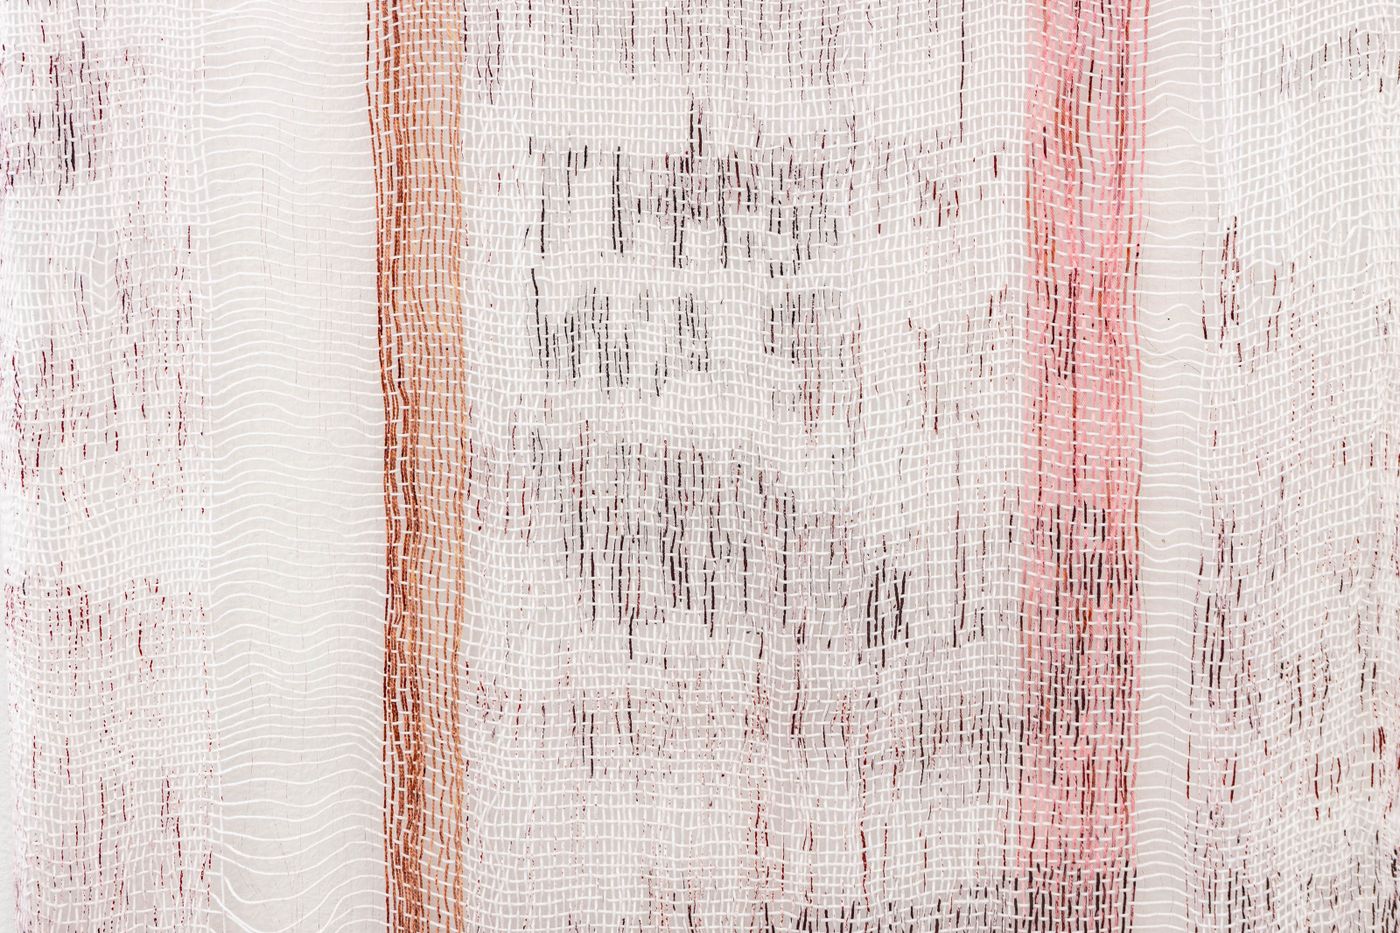 THE ELEMENTS MIGHT (detail), 2022. Woven on rigid heddle loom with dye and leno-weave; 26 x 67 in. Photo: Meghan Olson.